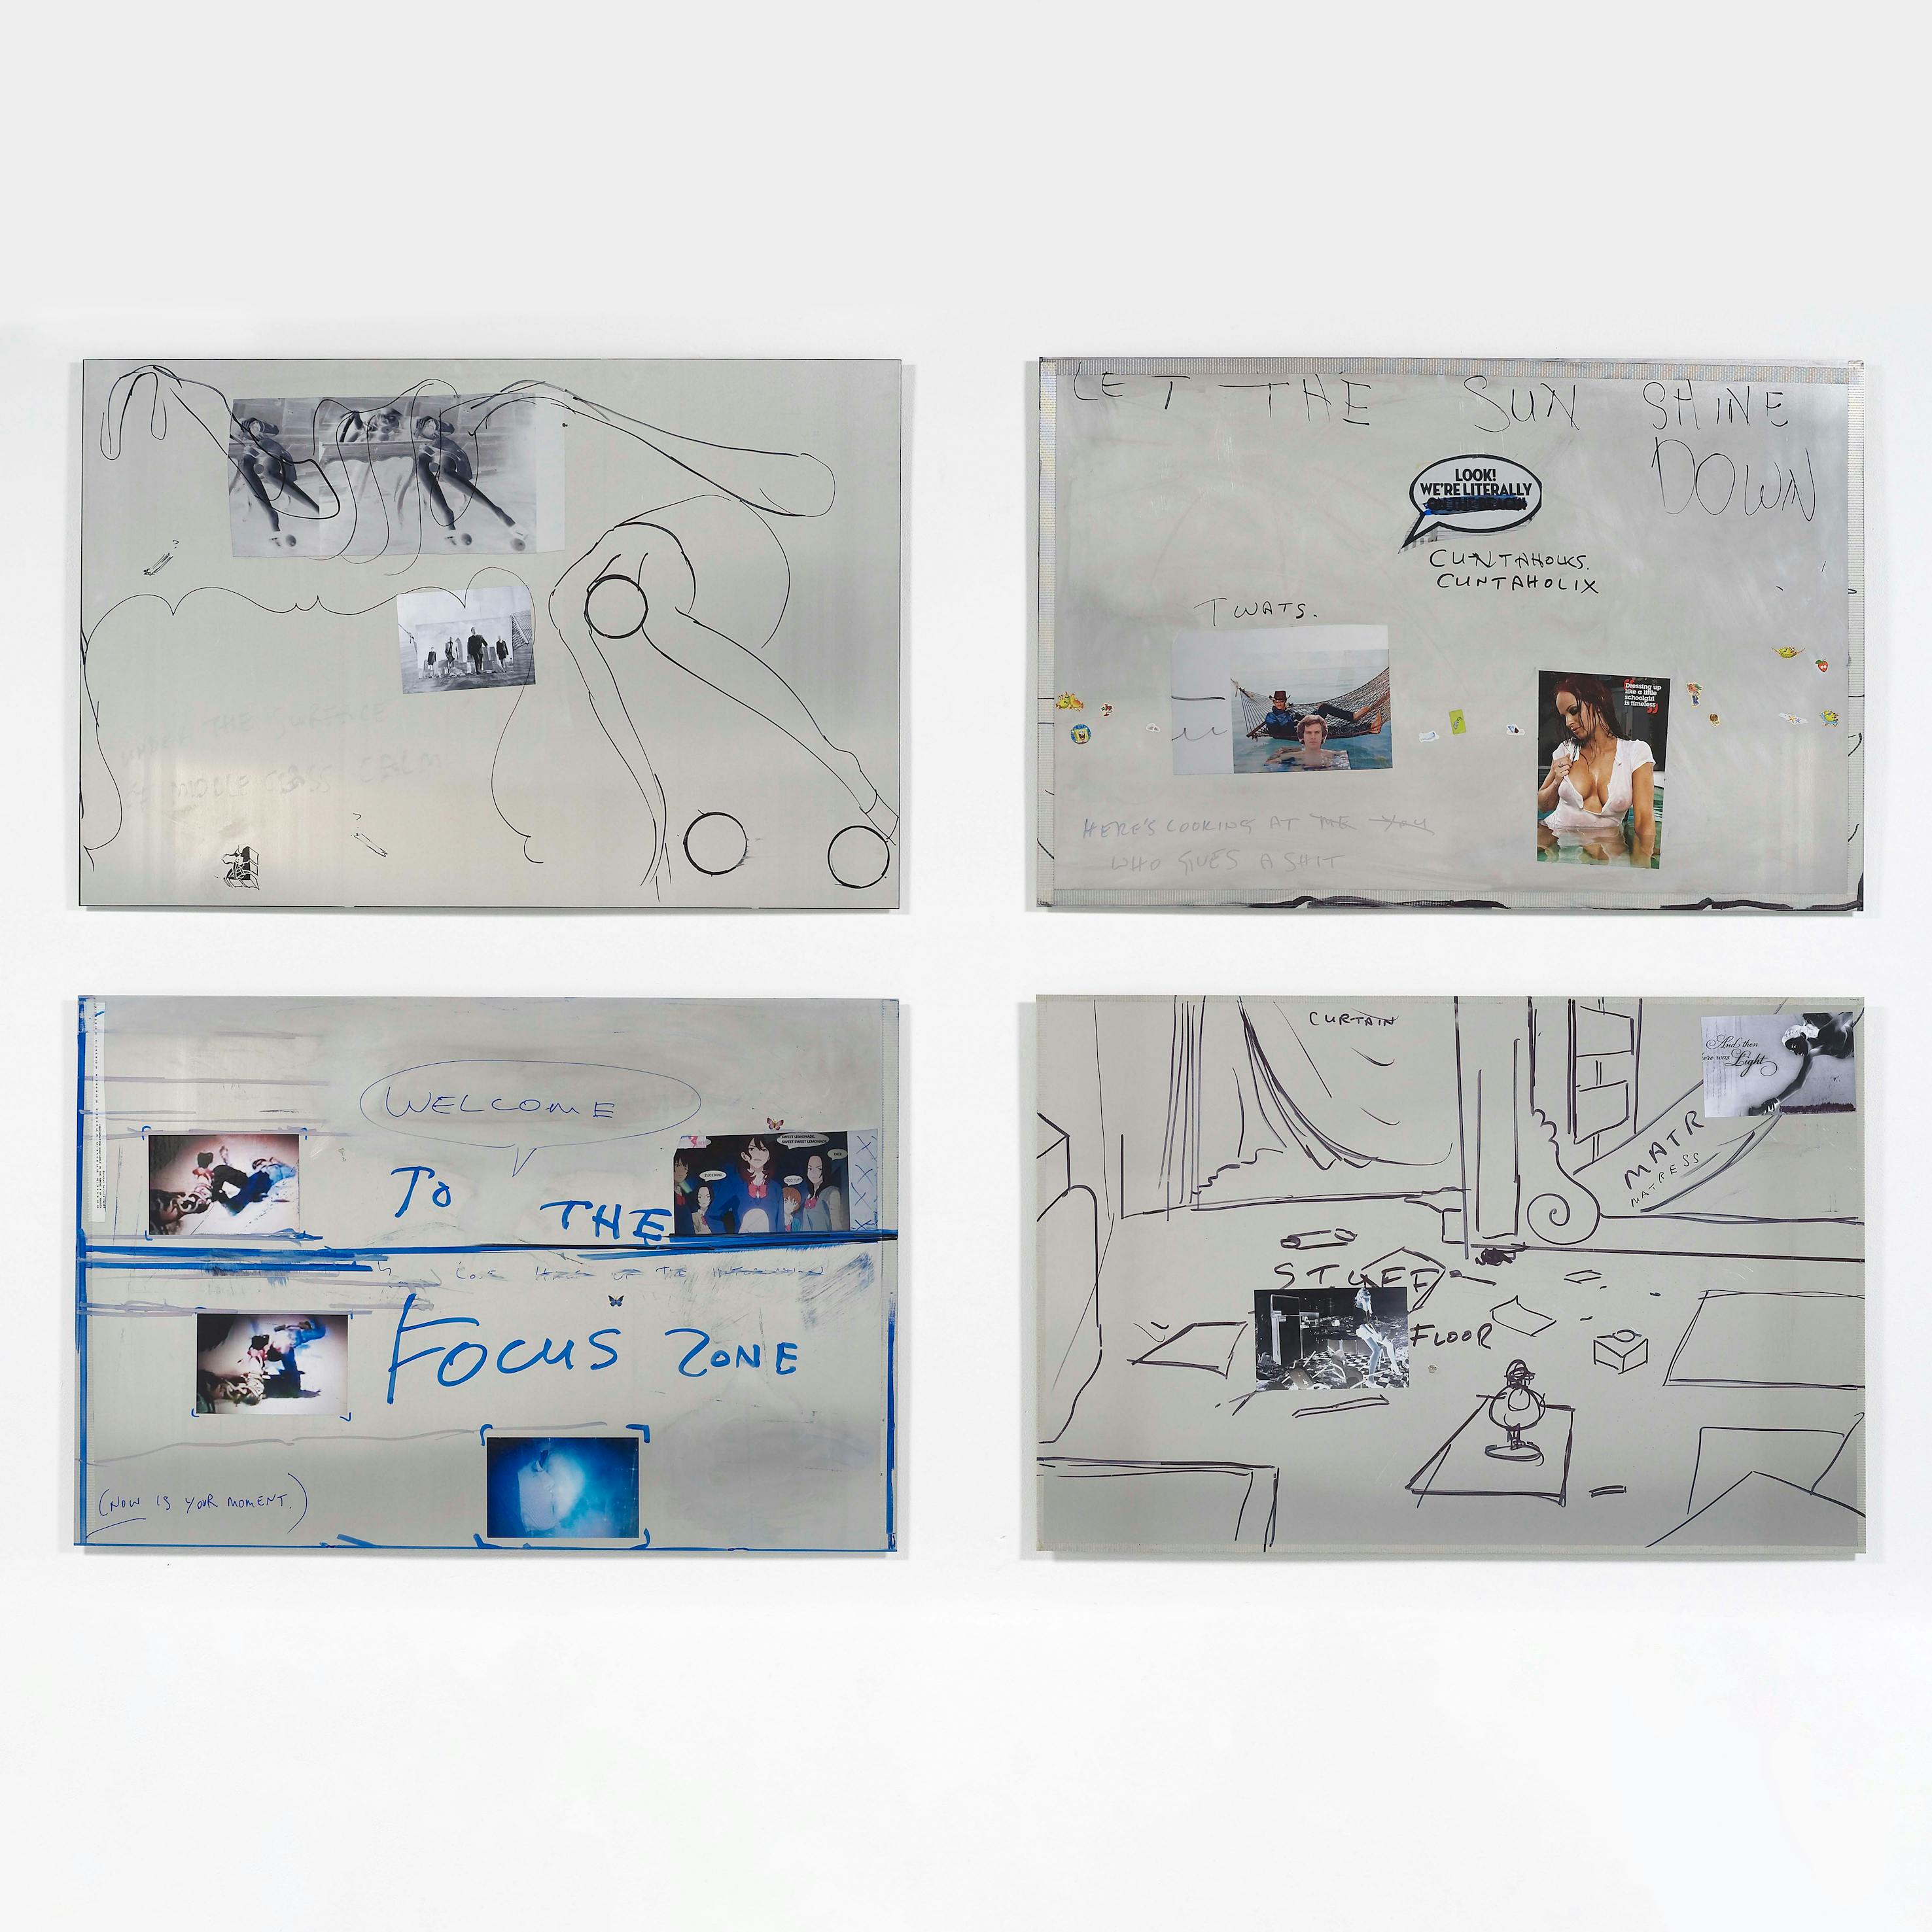 Aluminium tiles with collage, text and drawings on them, installed on to a white gallery wall